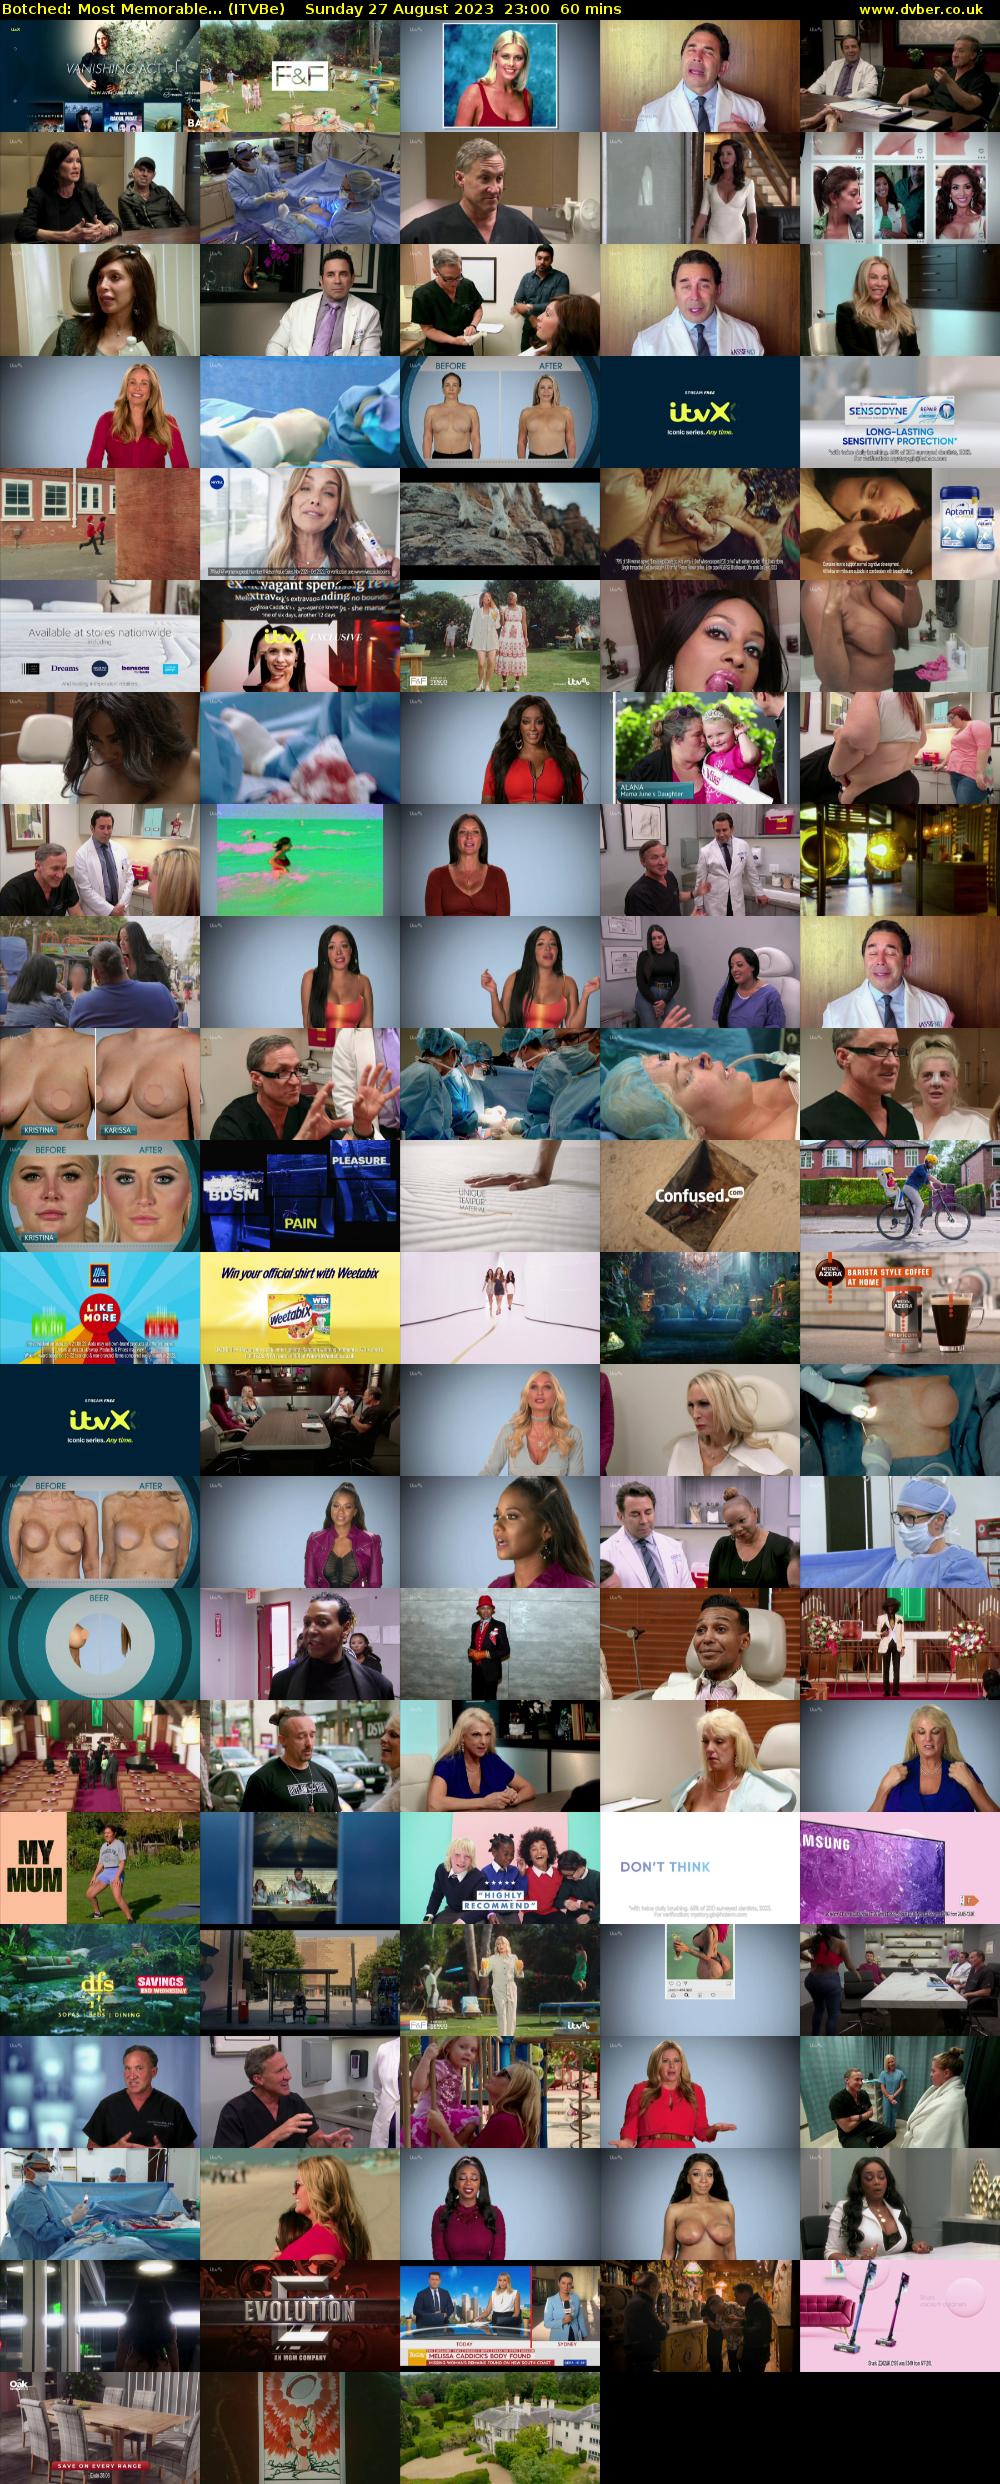 Botched: Most Memorable... (ITVBe) Sunday 27 August 2023 23:00 - 00:00